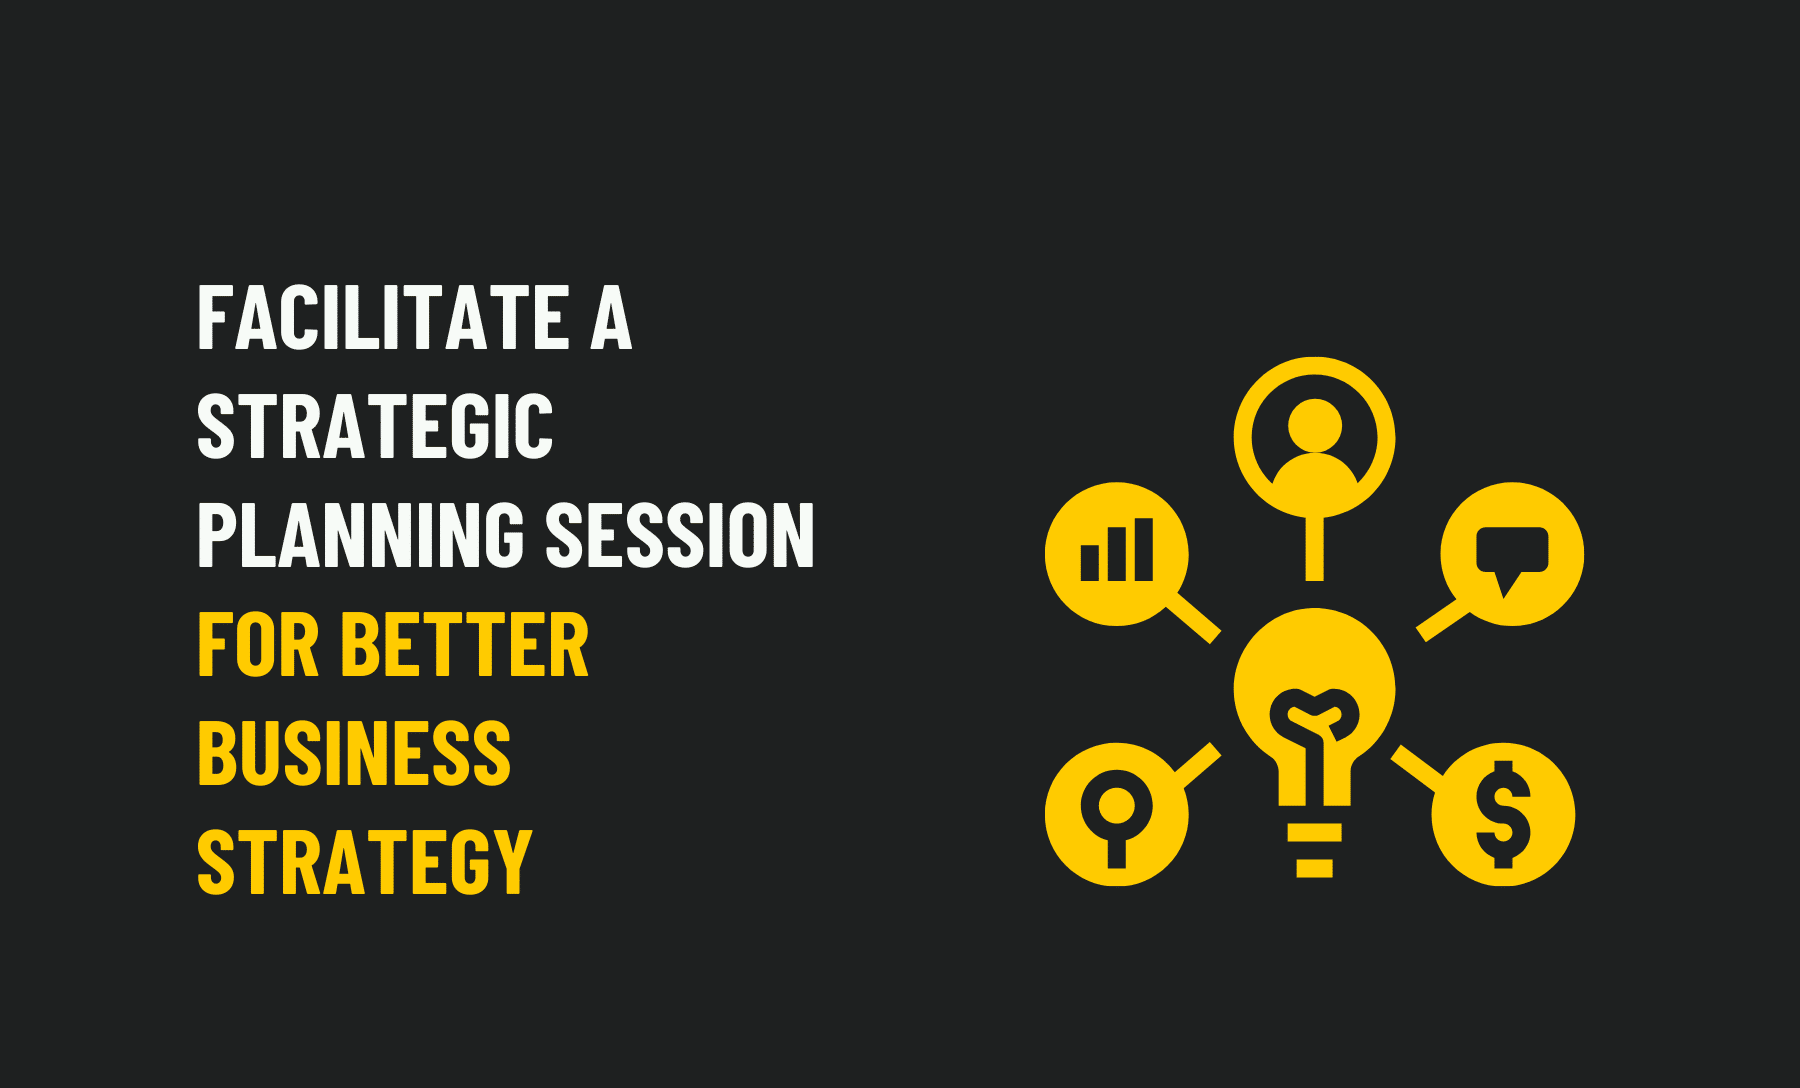 Facilitate A Strategic Planning Session for Better Business Strategy